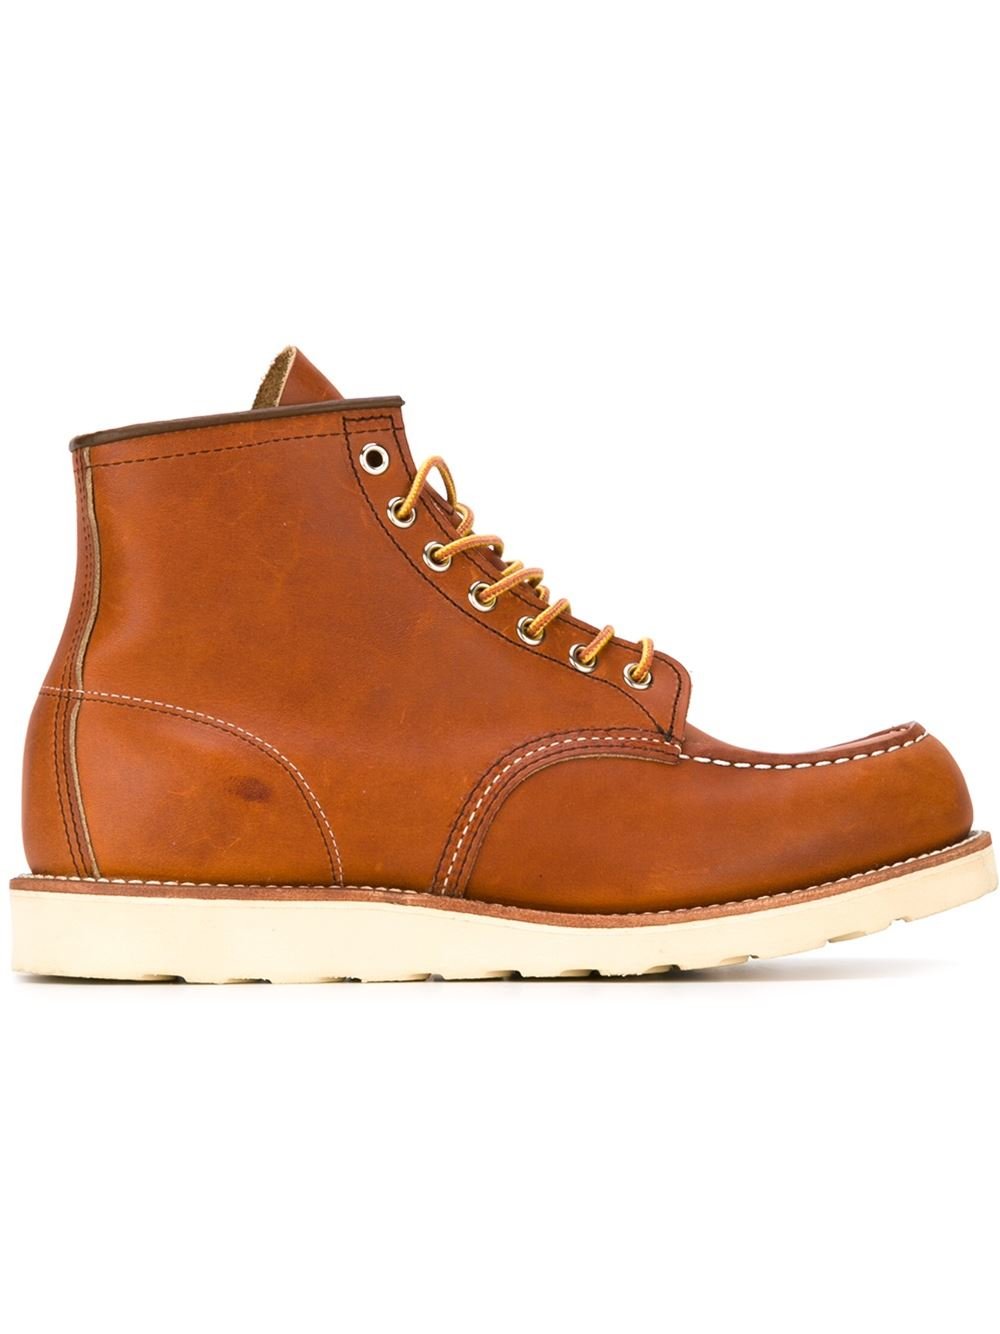 Download Lyst - Red Wing 'inch Mock' Boots in Brown for Men